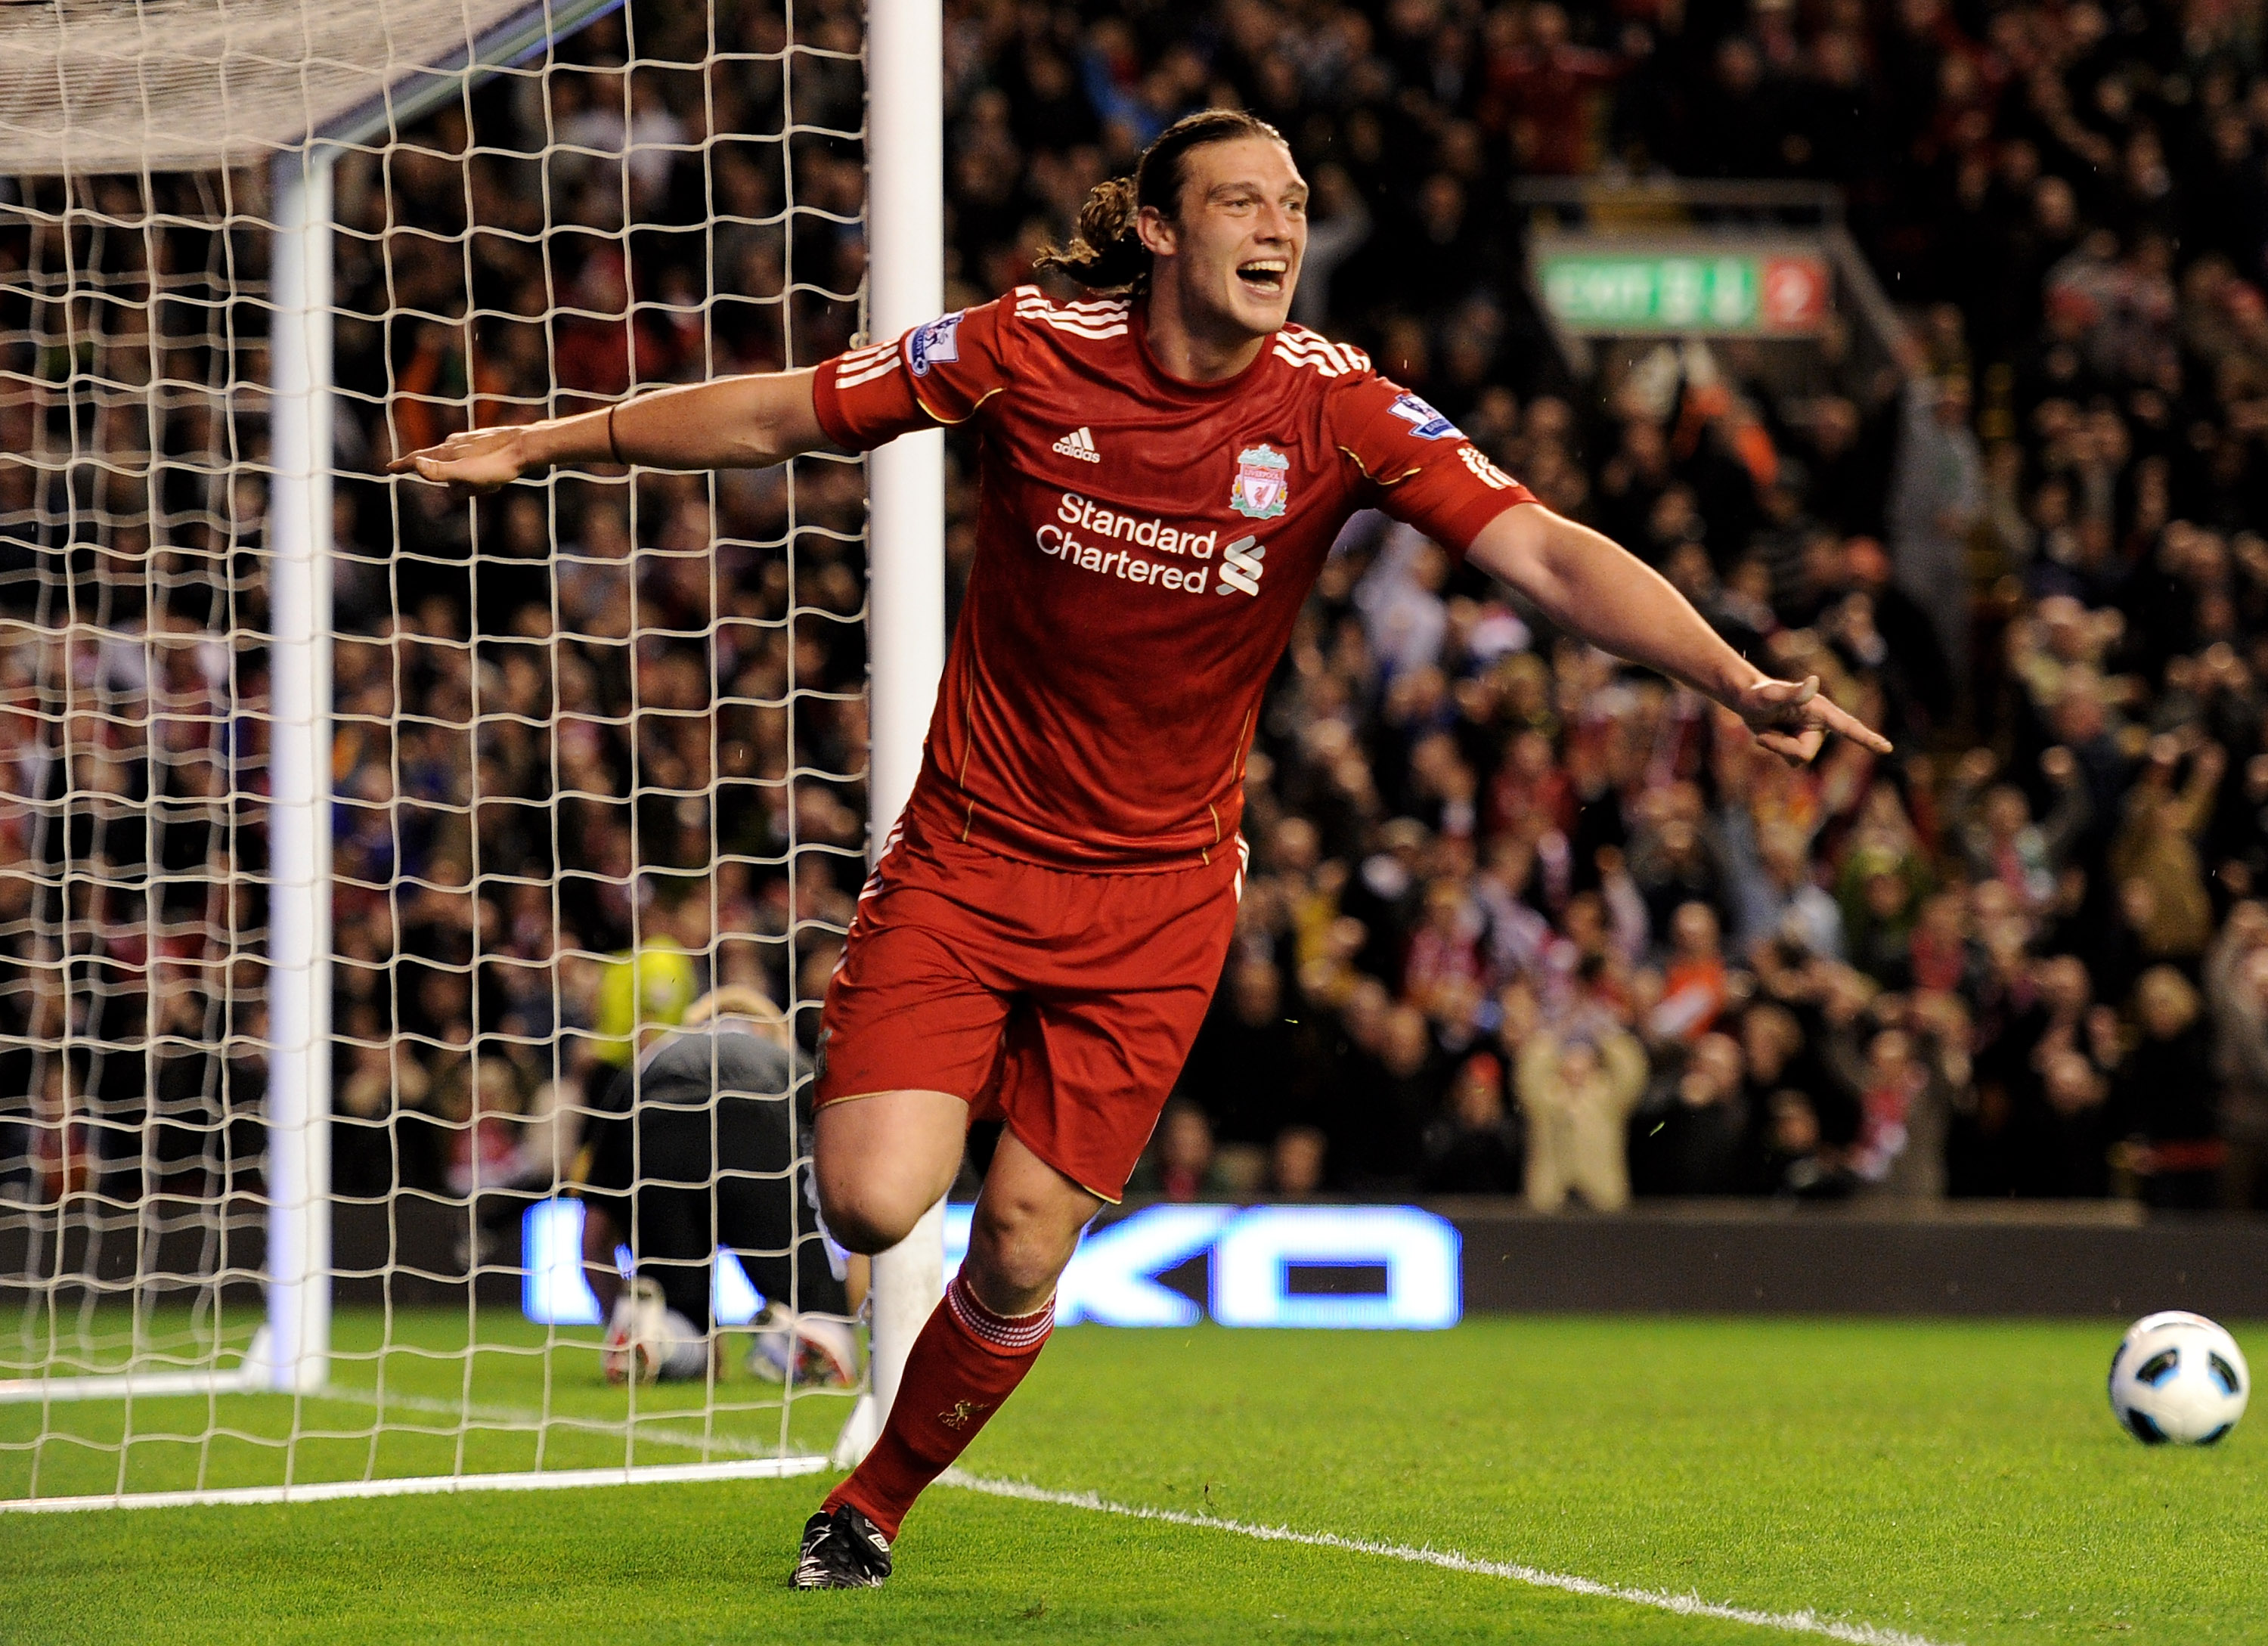 LIVERPOOL, ENGLAND - APRIL 11:  Andy Carroll of Liverpool celebrates scoring his team's third goal during the Barclays Premier League match between Liverpool and Manchester City at Anfield on April 11, 2011 in Liverpool, England.  (Photo by Michael Regan/